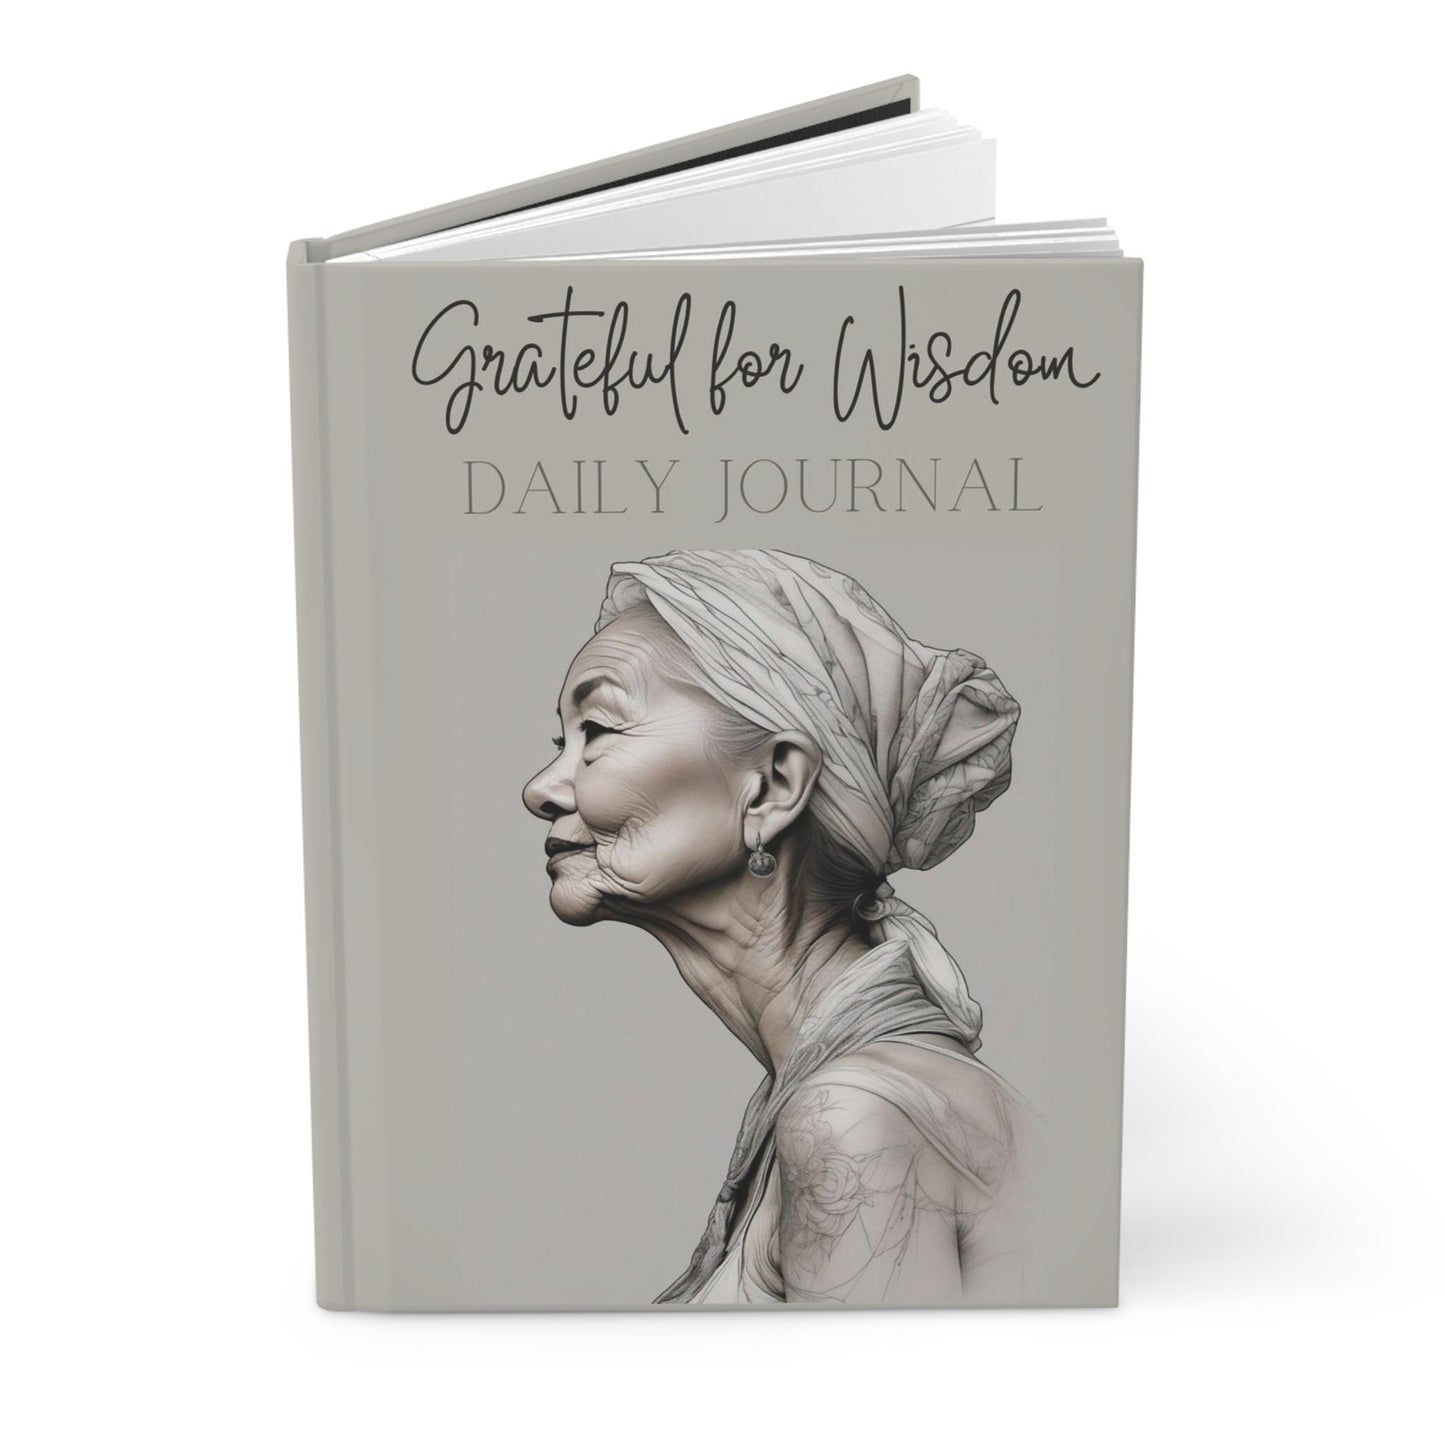 Grateful for Wisdom Daily Journal, Writing Notebook, Gift for Mom, Gift for Grandmother, Self-Care Book